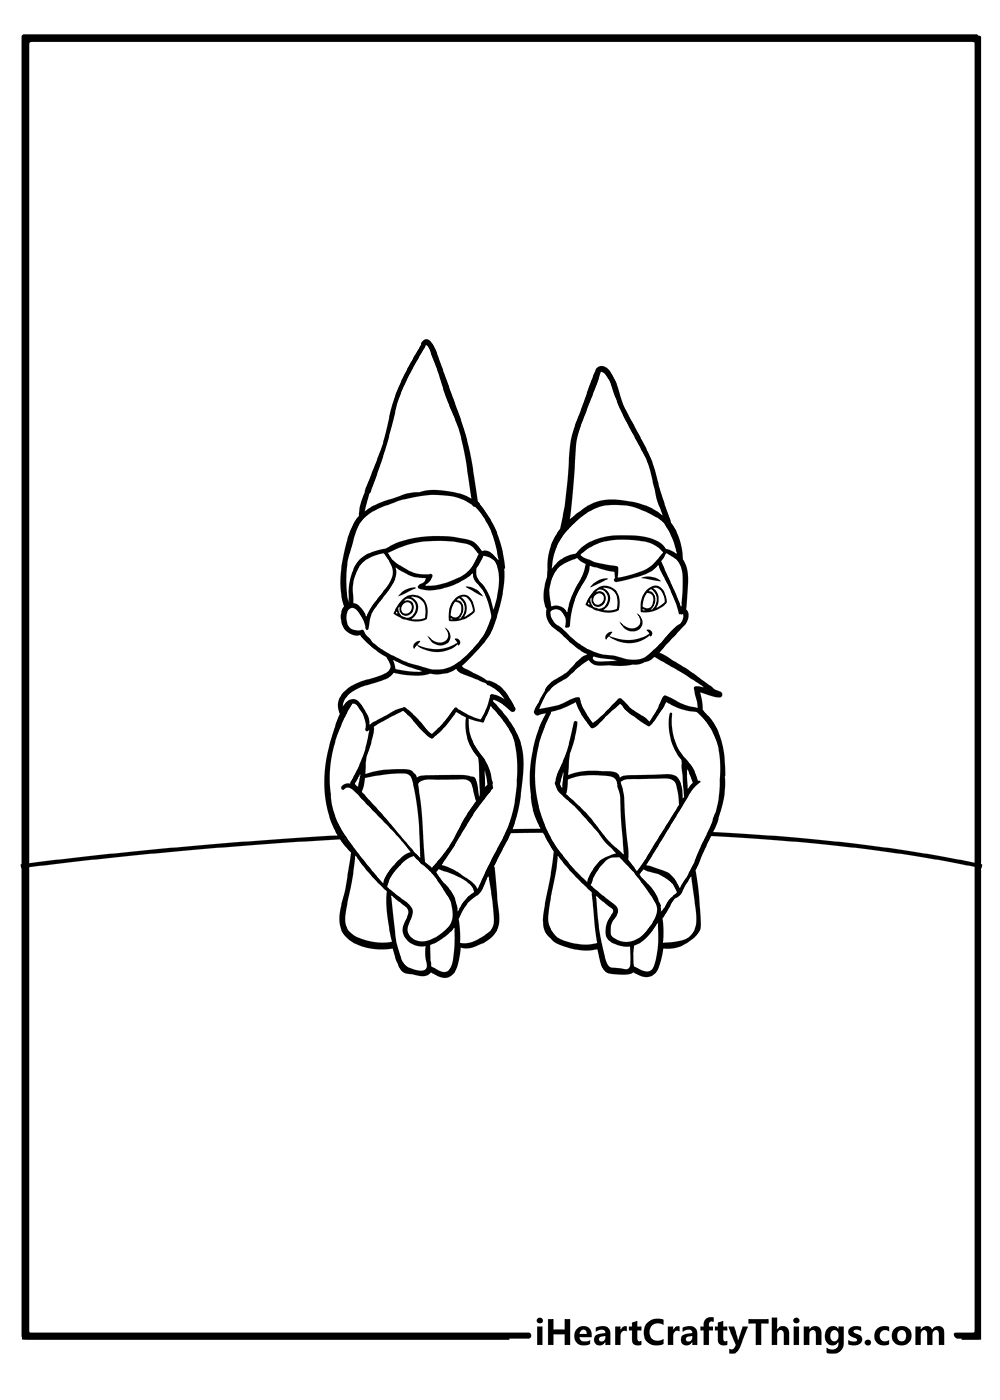 Elf on the Shelf Coloring Pages free print out